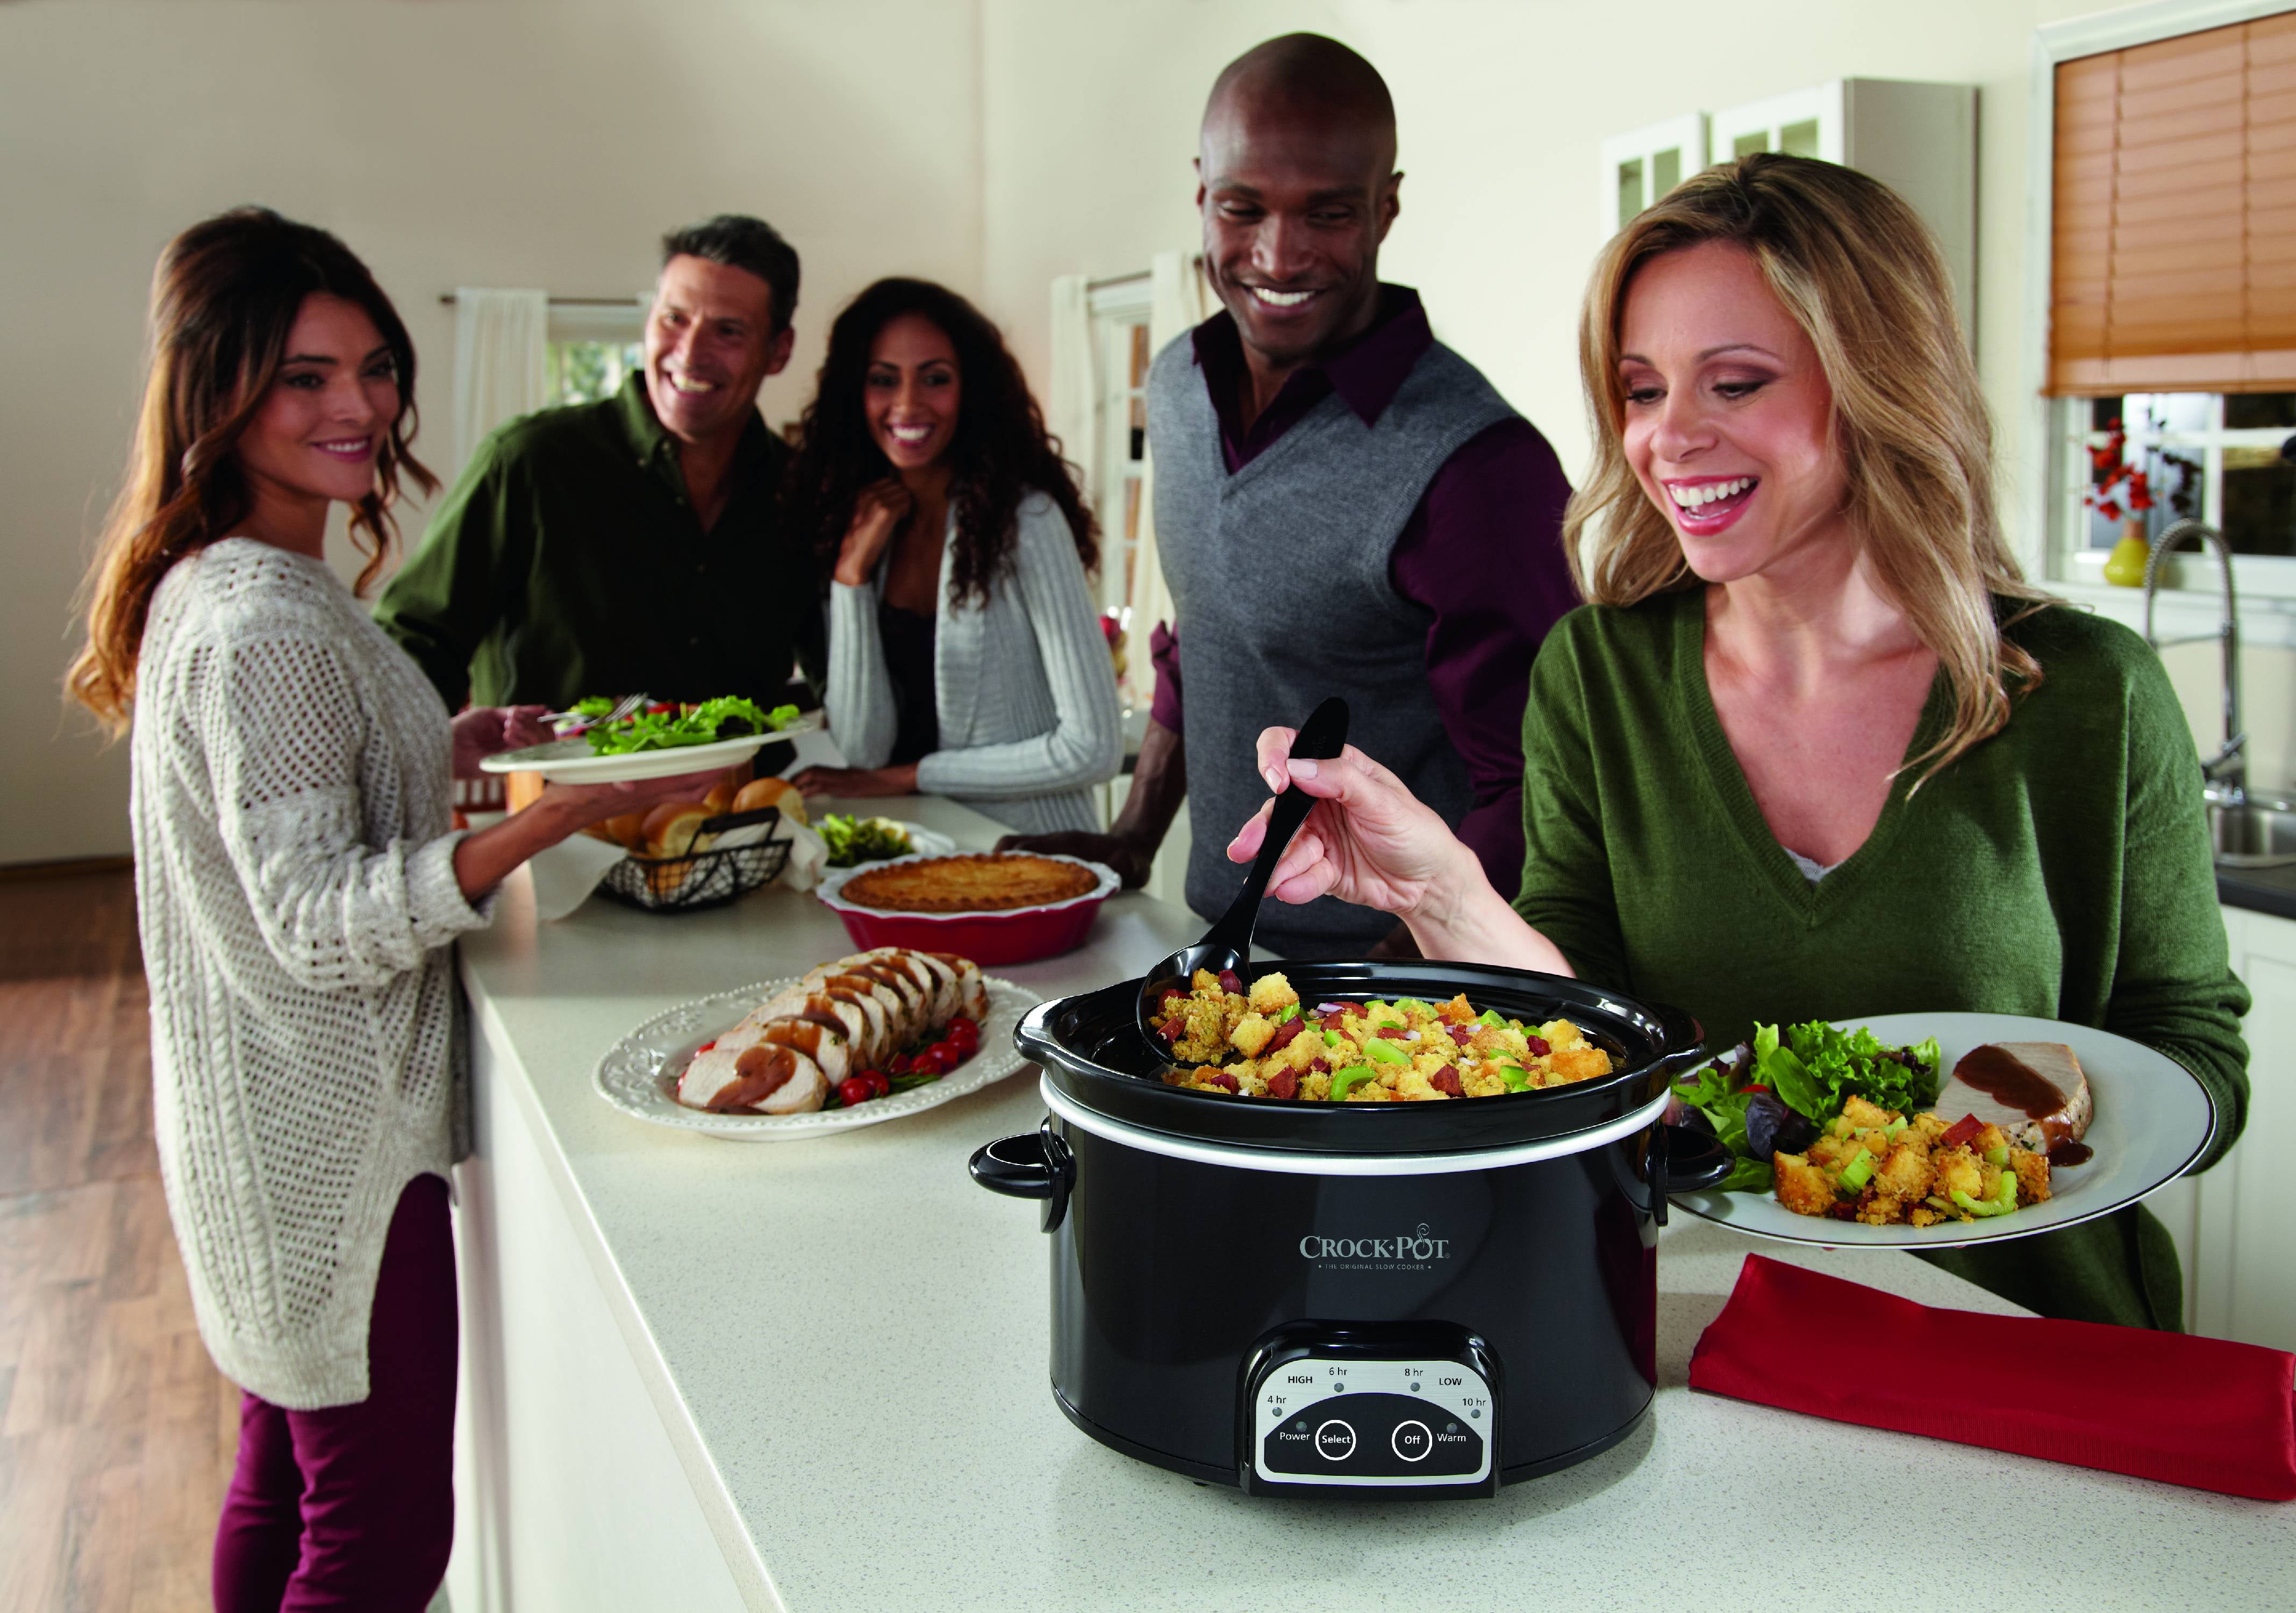 RIVAL SCV400-SS Stainless Steel 4 Quart Slow Cooker 